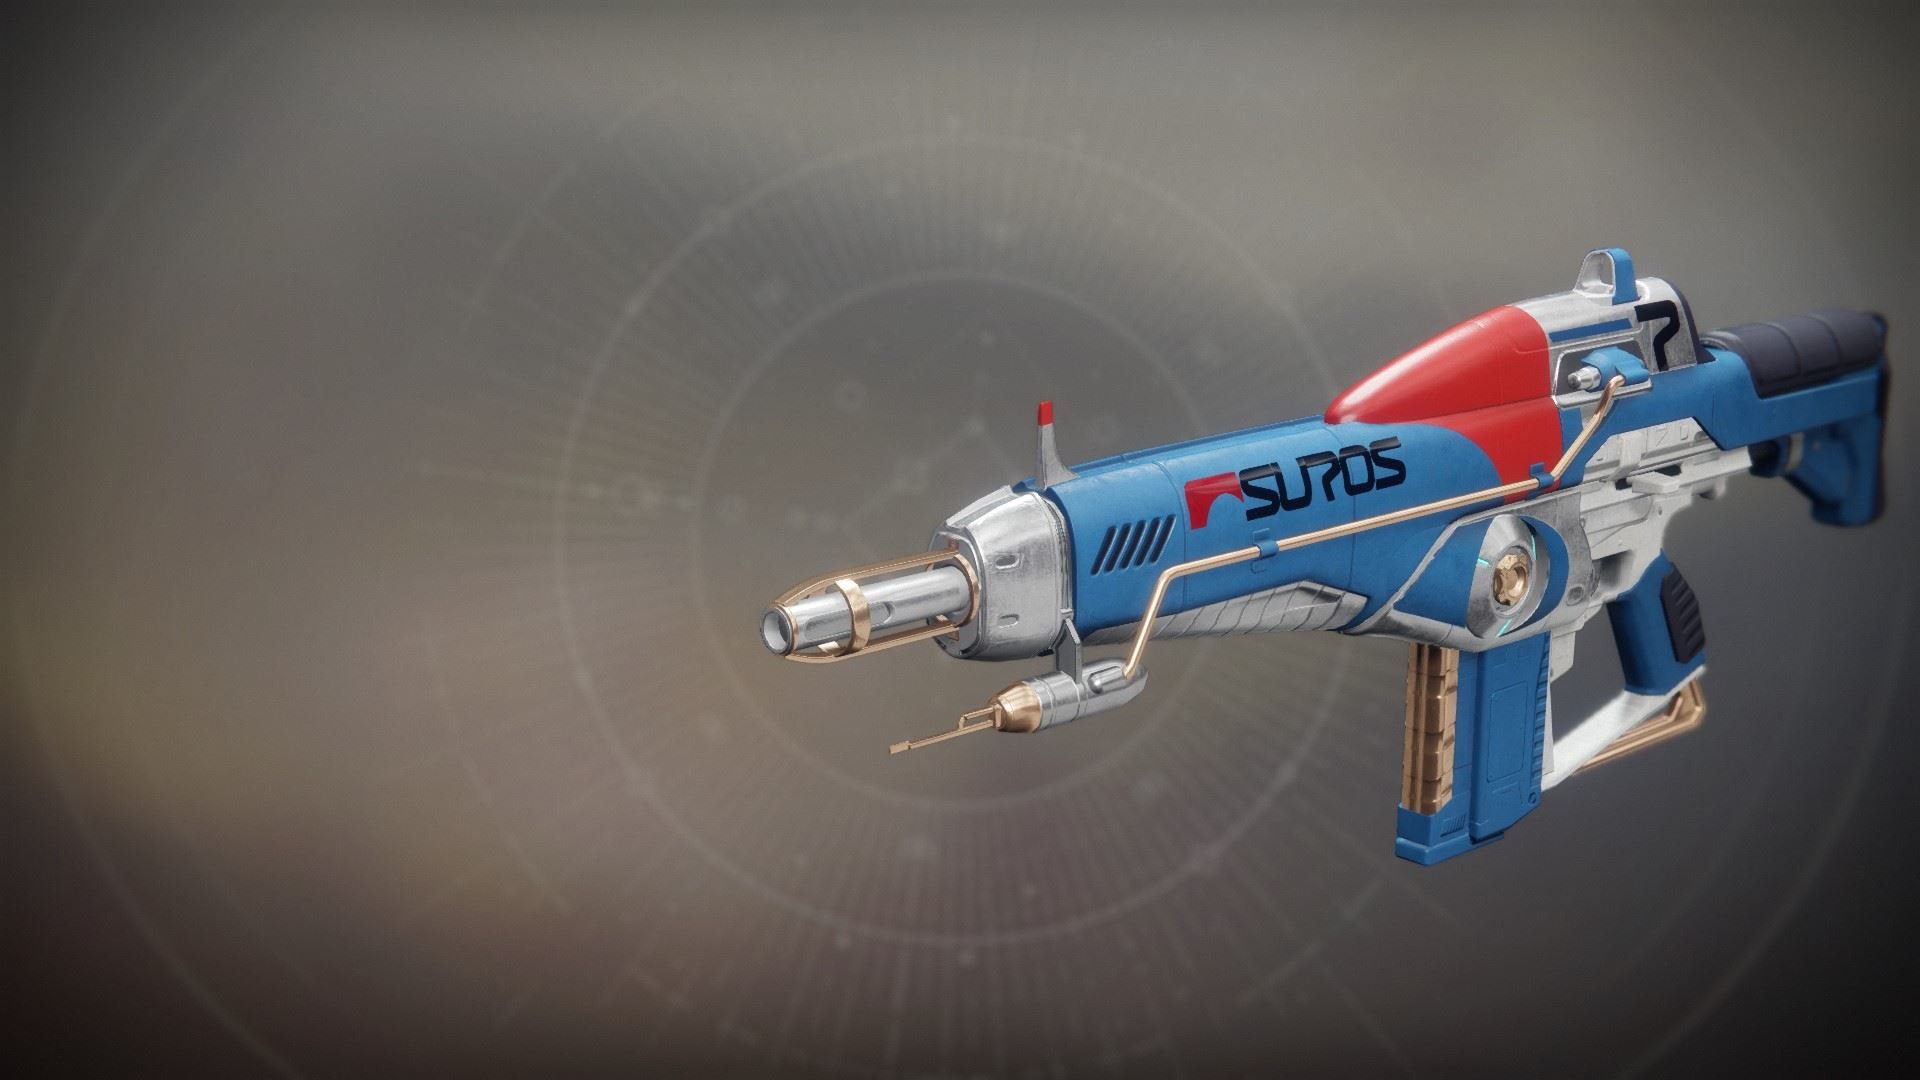 An in-game render of the SUROS Regime.